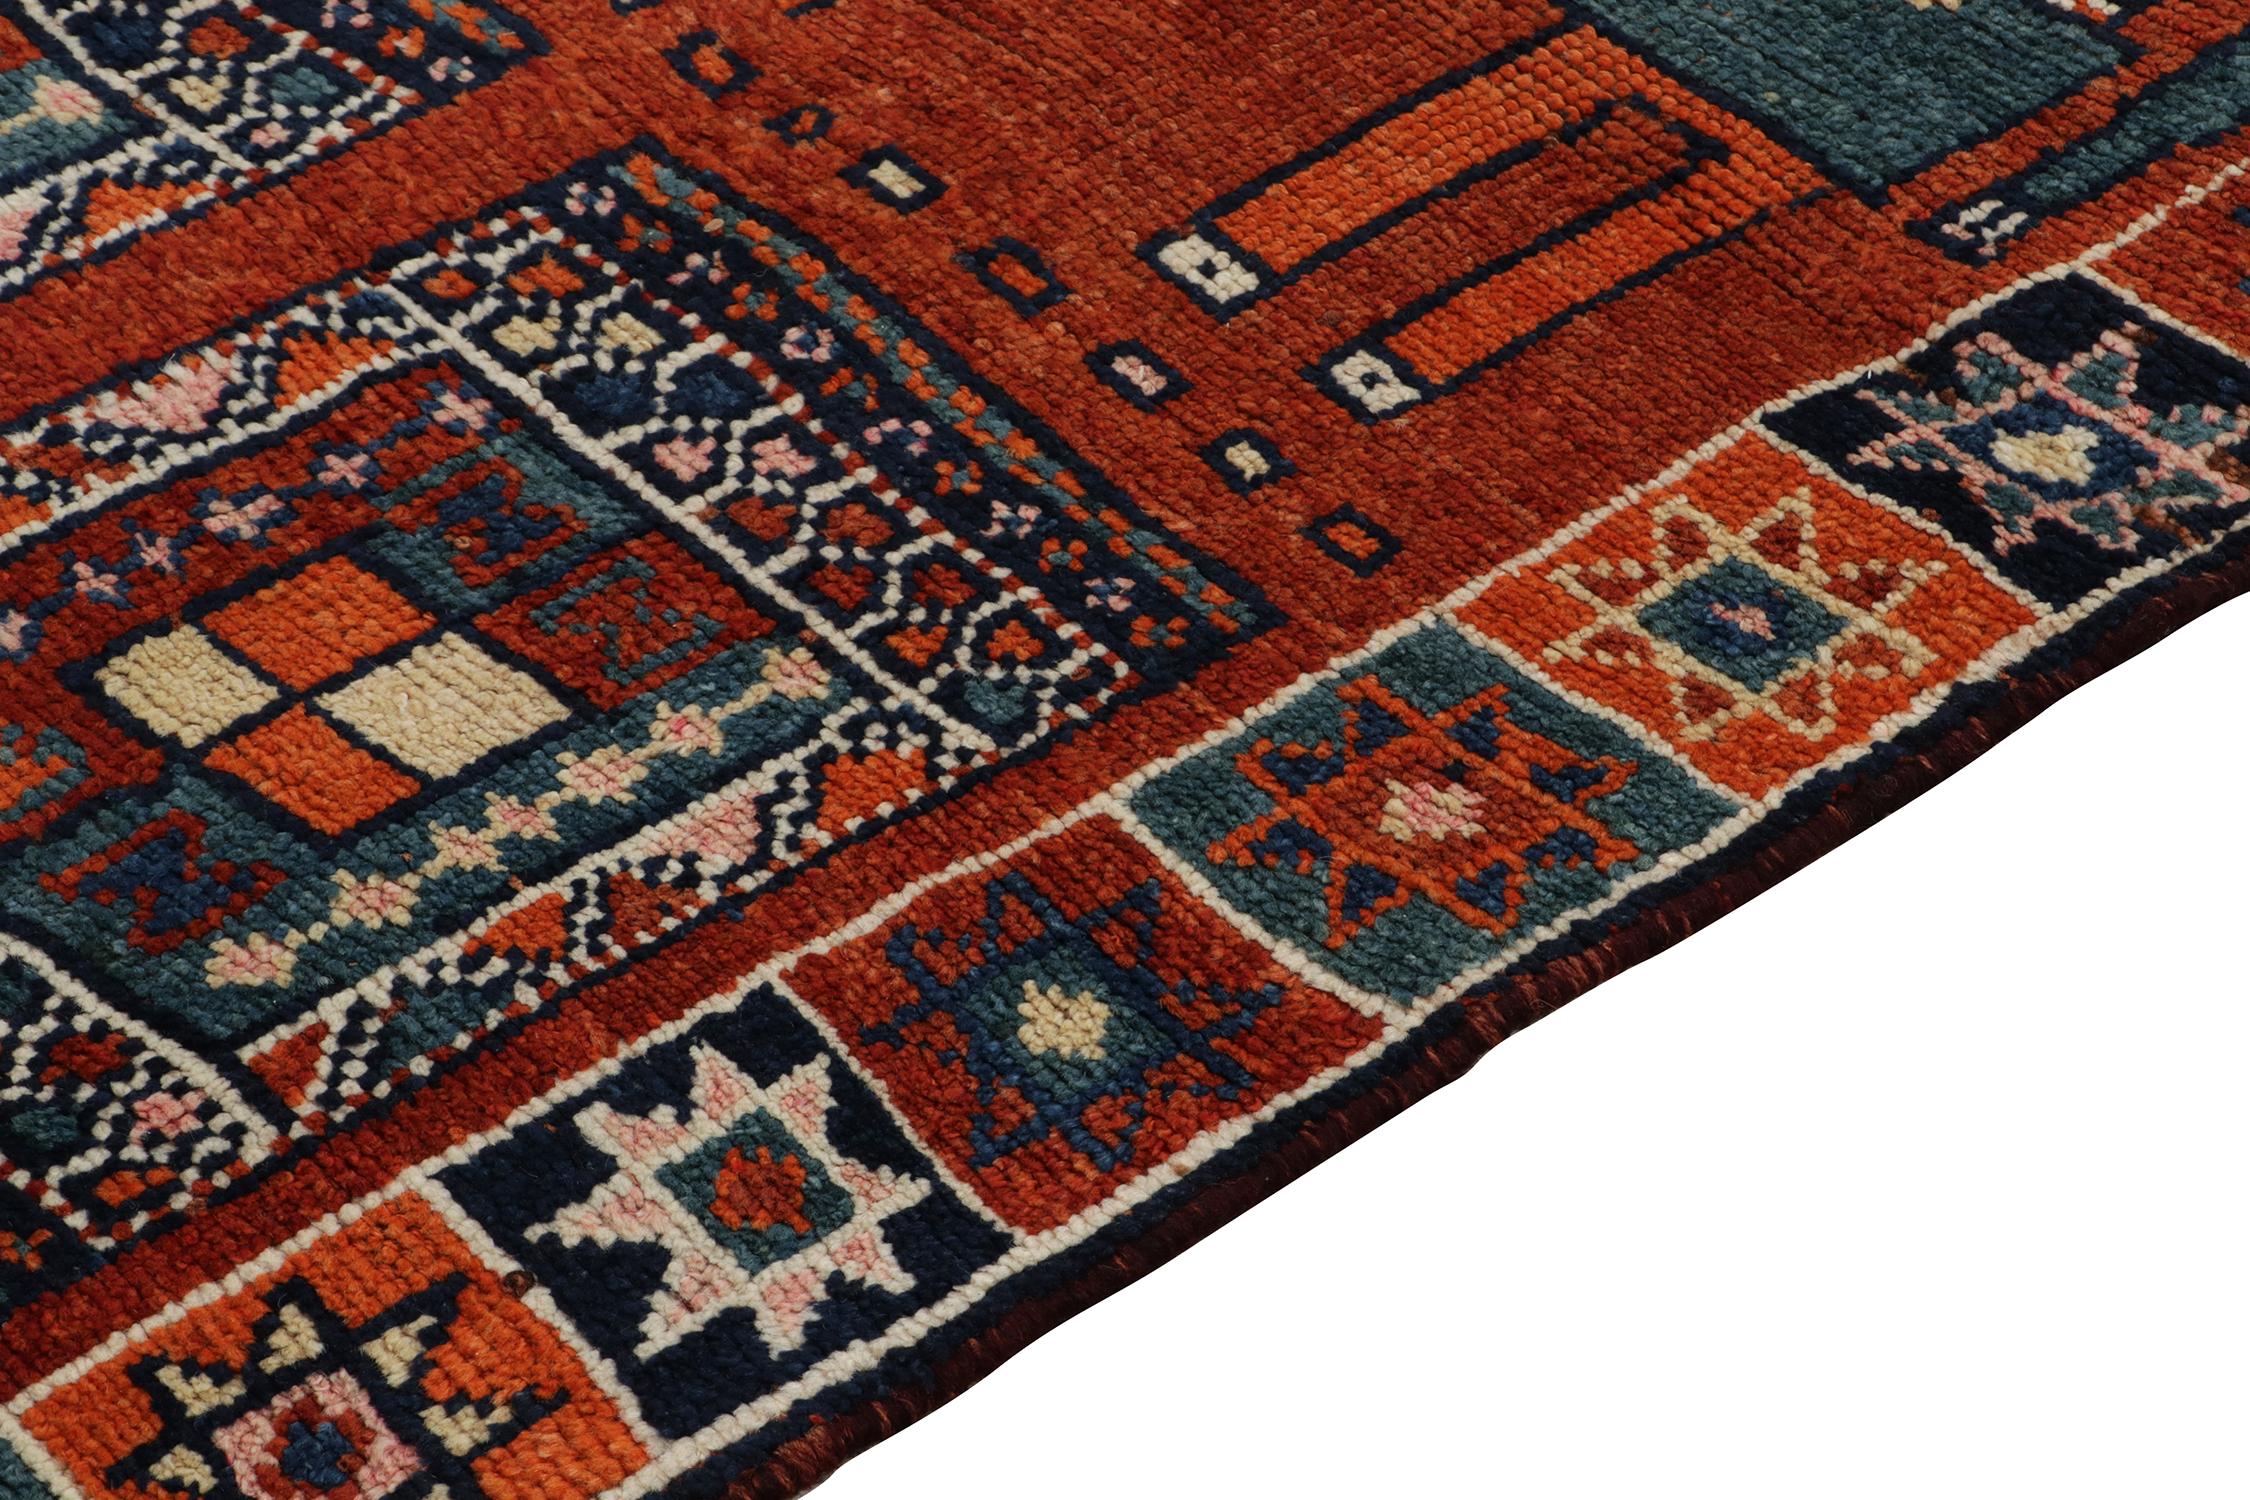 Hand-Knotted 1950s Vintage Tribal Rug in Orange, Red and Blue Pictorial Patterns For Sale